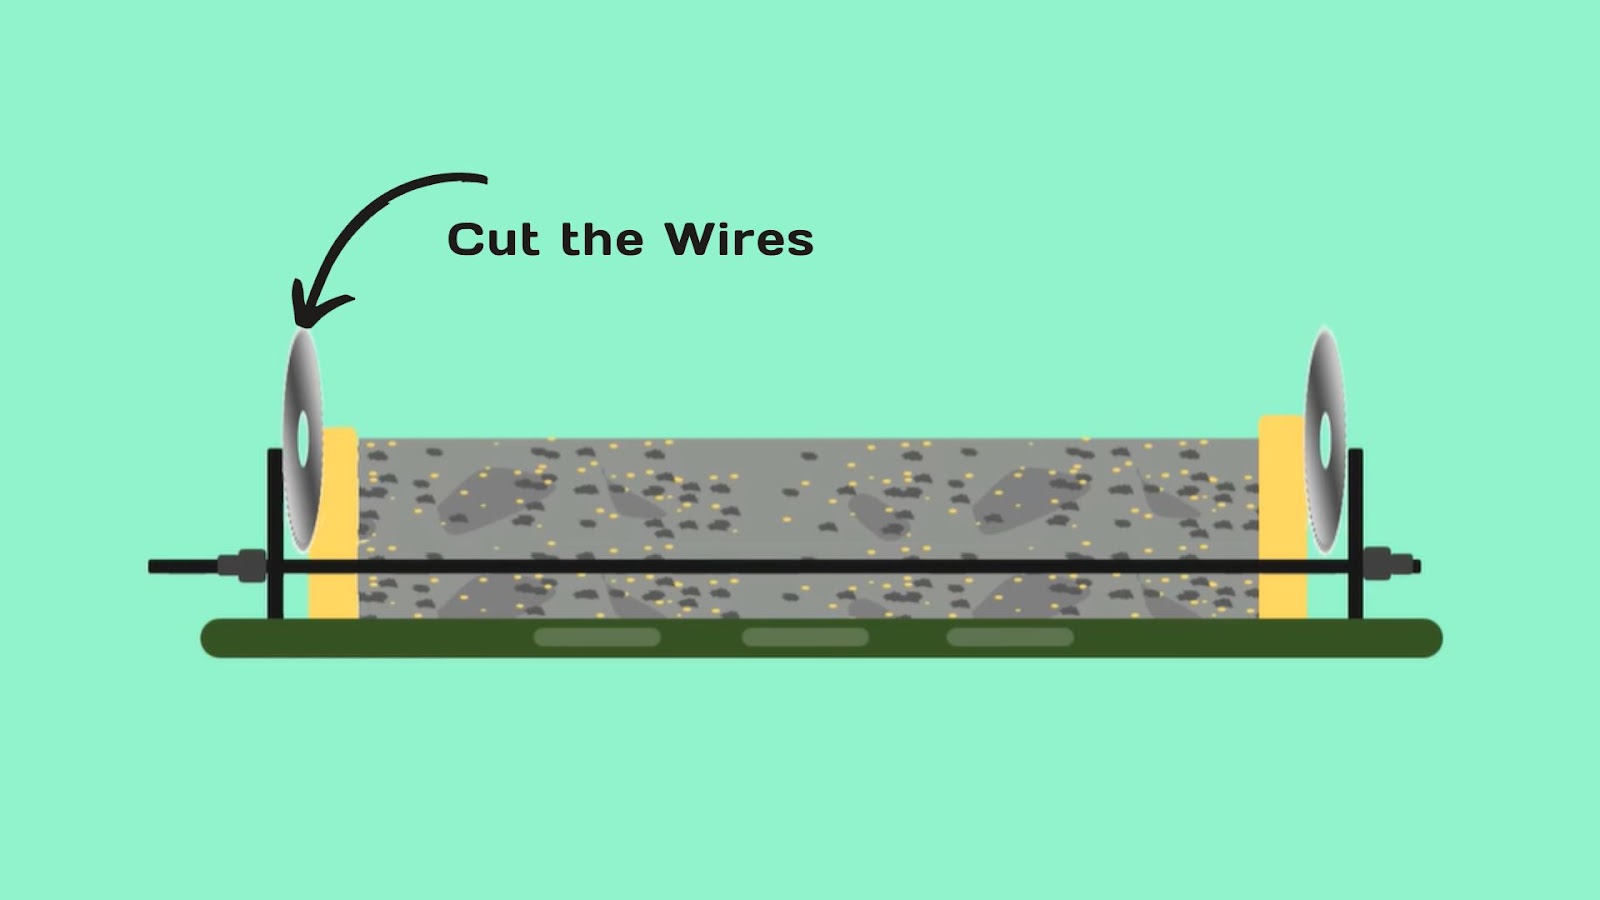 Cut the Wires